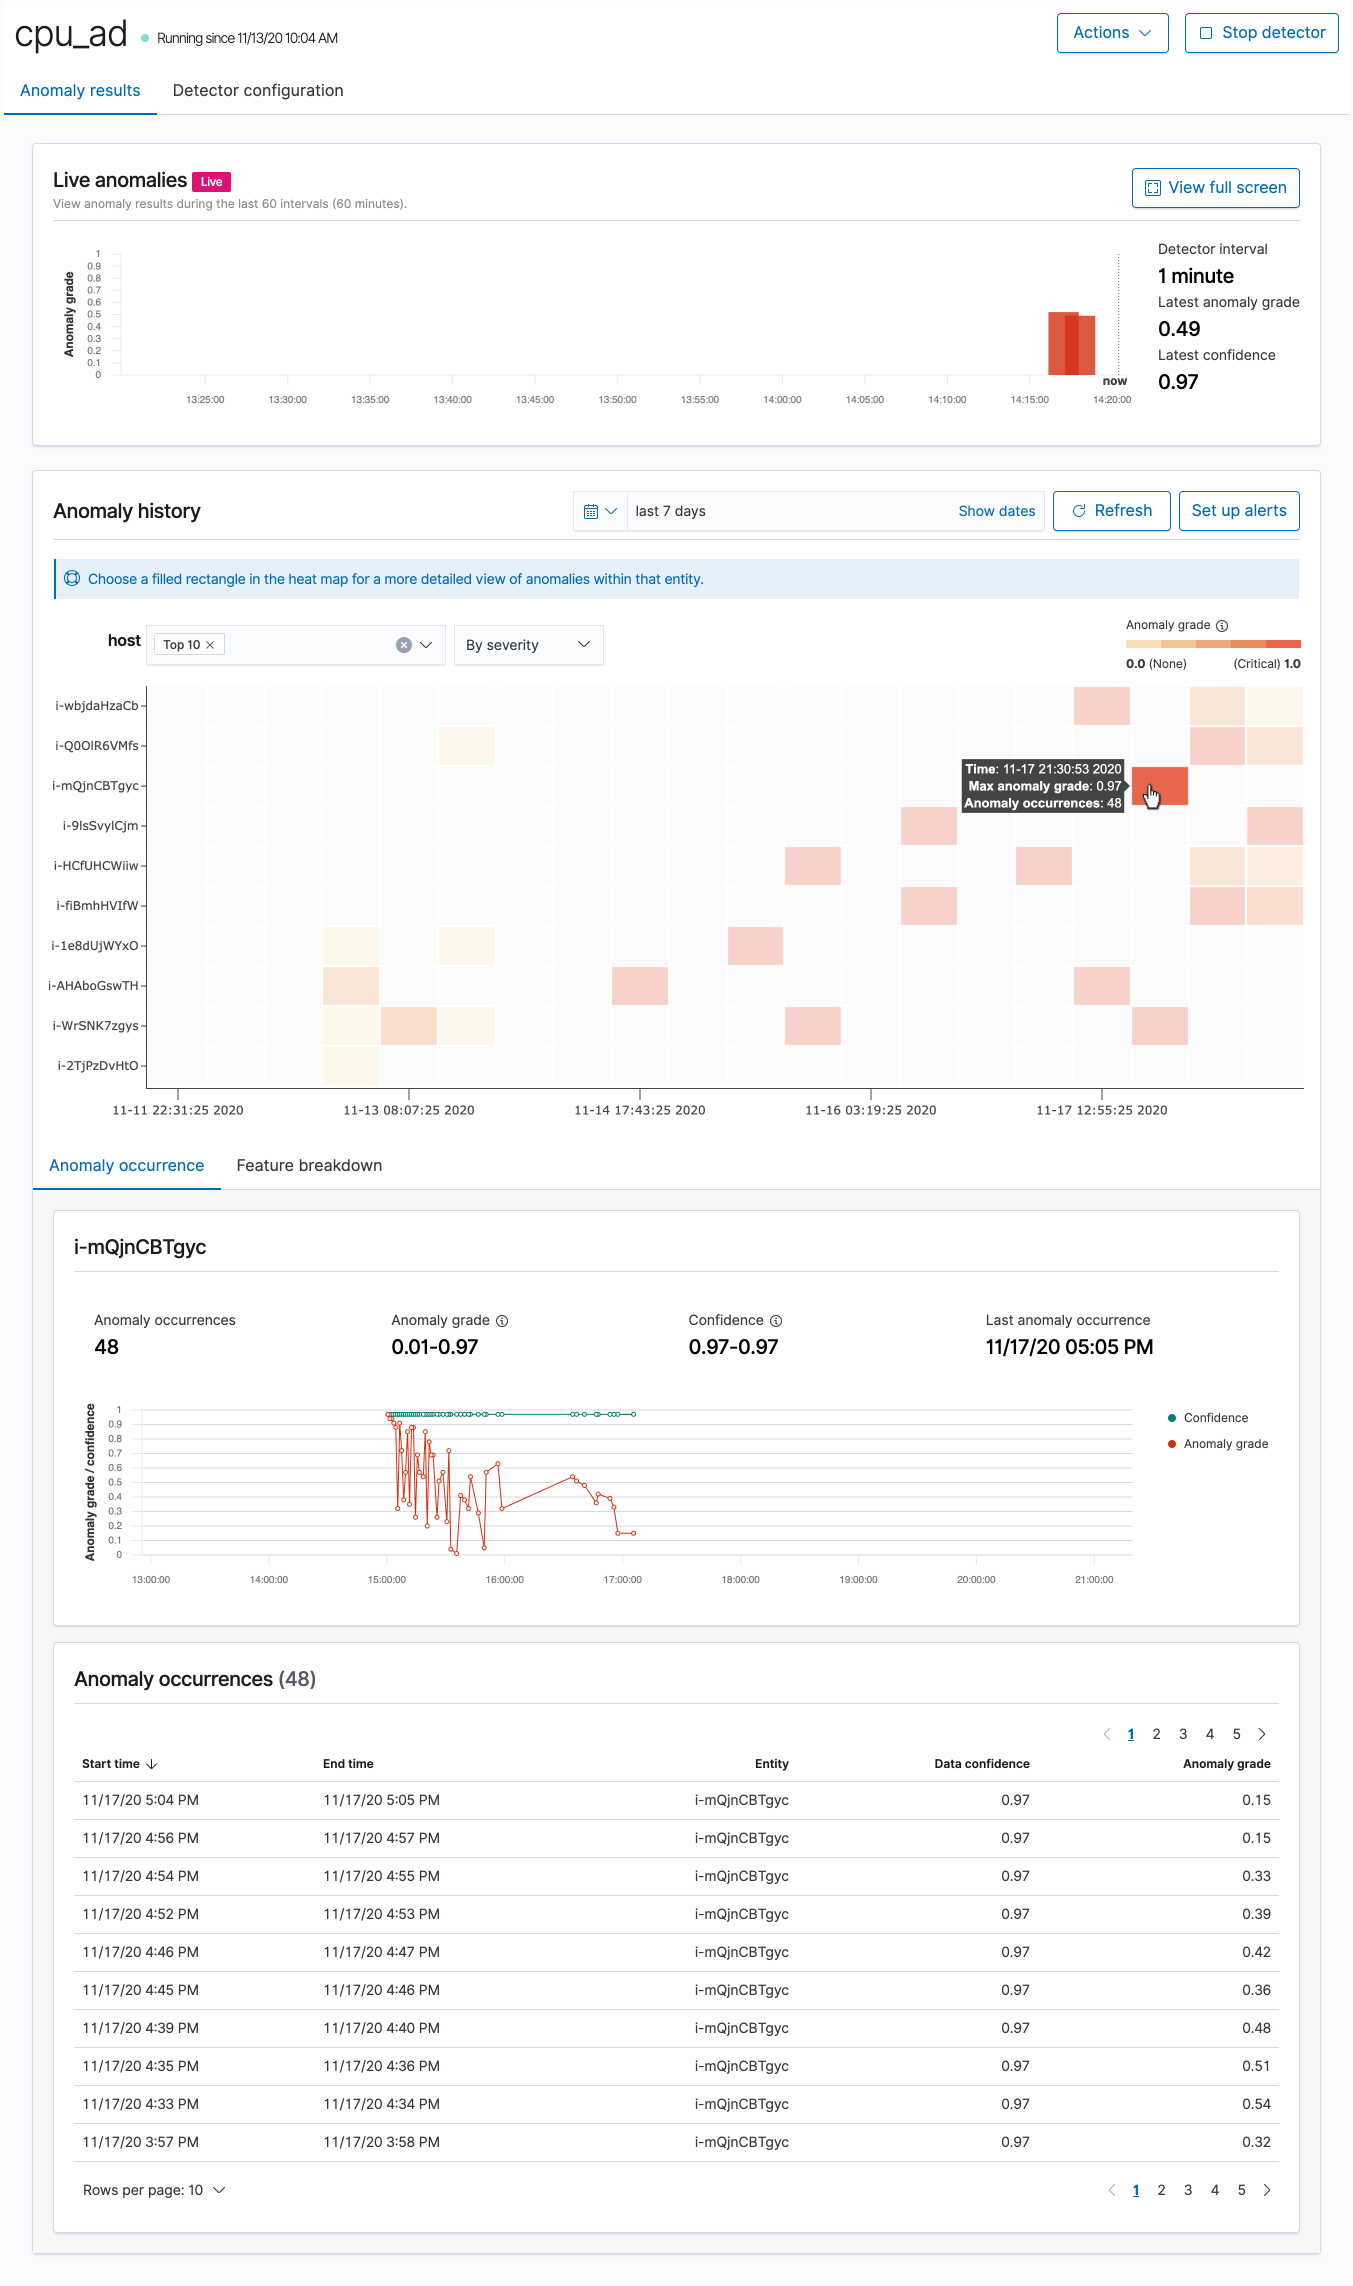 
                    The following visualizations are available on the anomaly detection
                        dashboard:
                